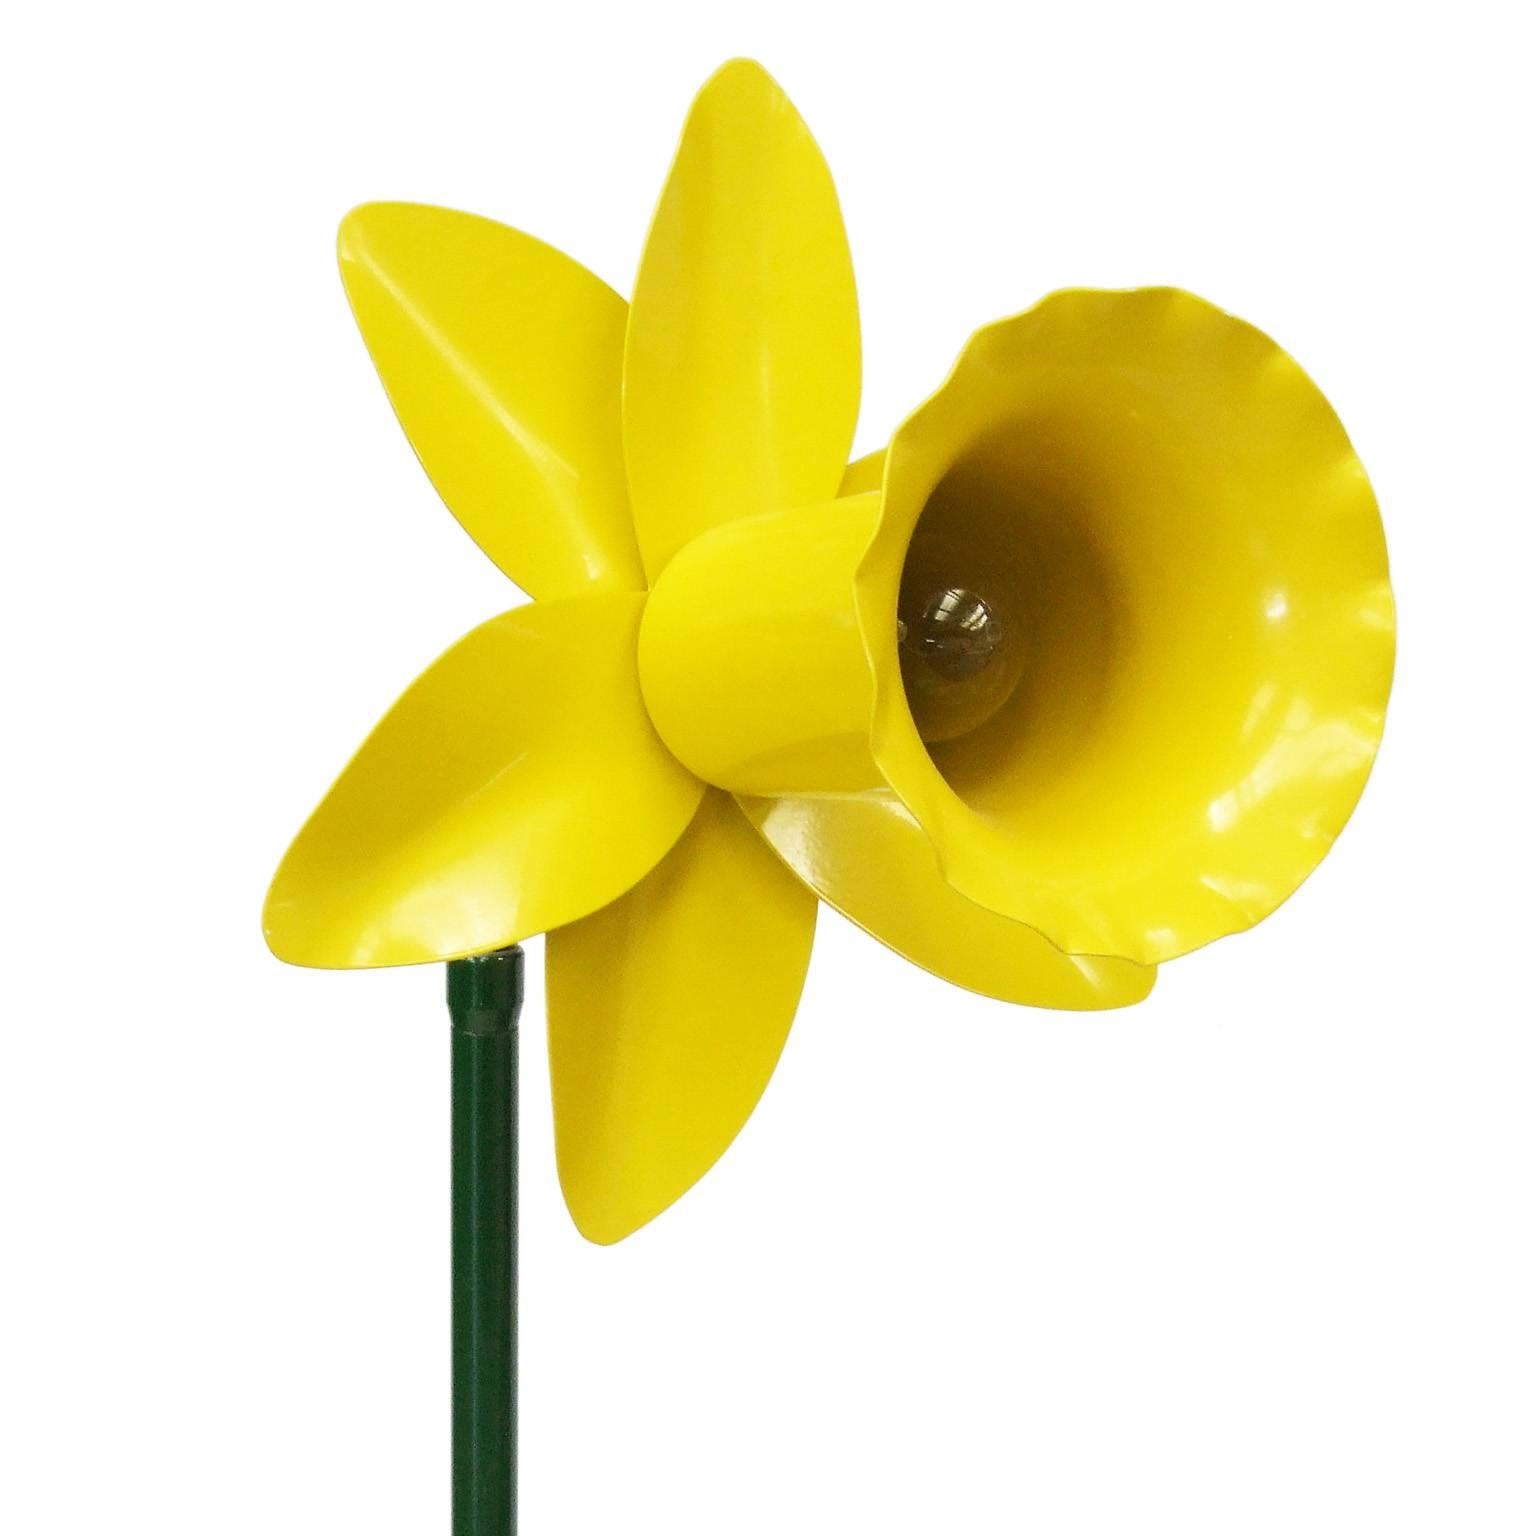 1980s flower floor lamp designed by Mike Bliss for Bliss, UK.

Green and yellow metal daffodil design.

Directional lamp shade.

Measures: H 178 cm x L 32 cm x W 30 cm.